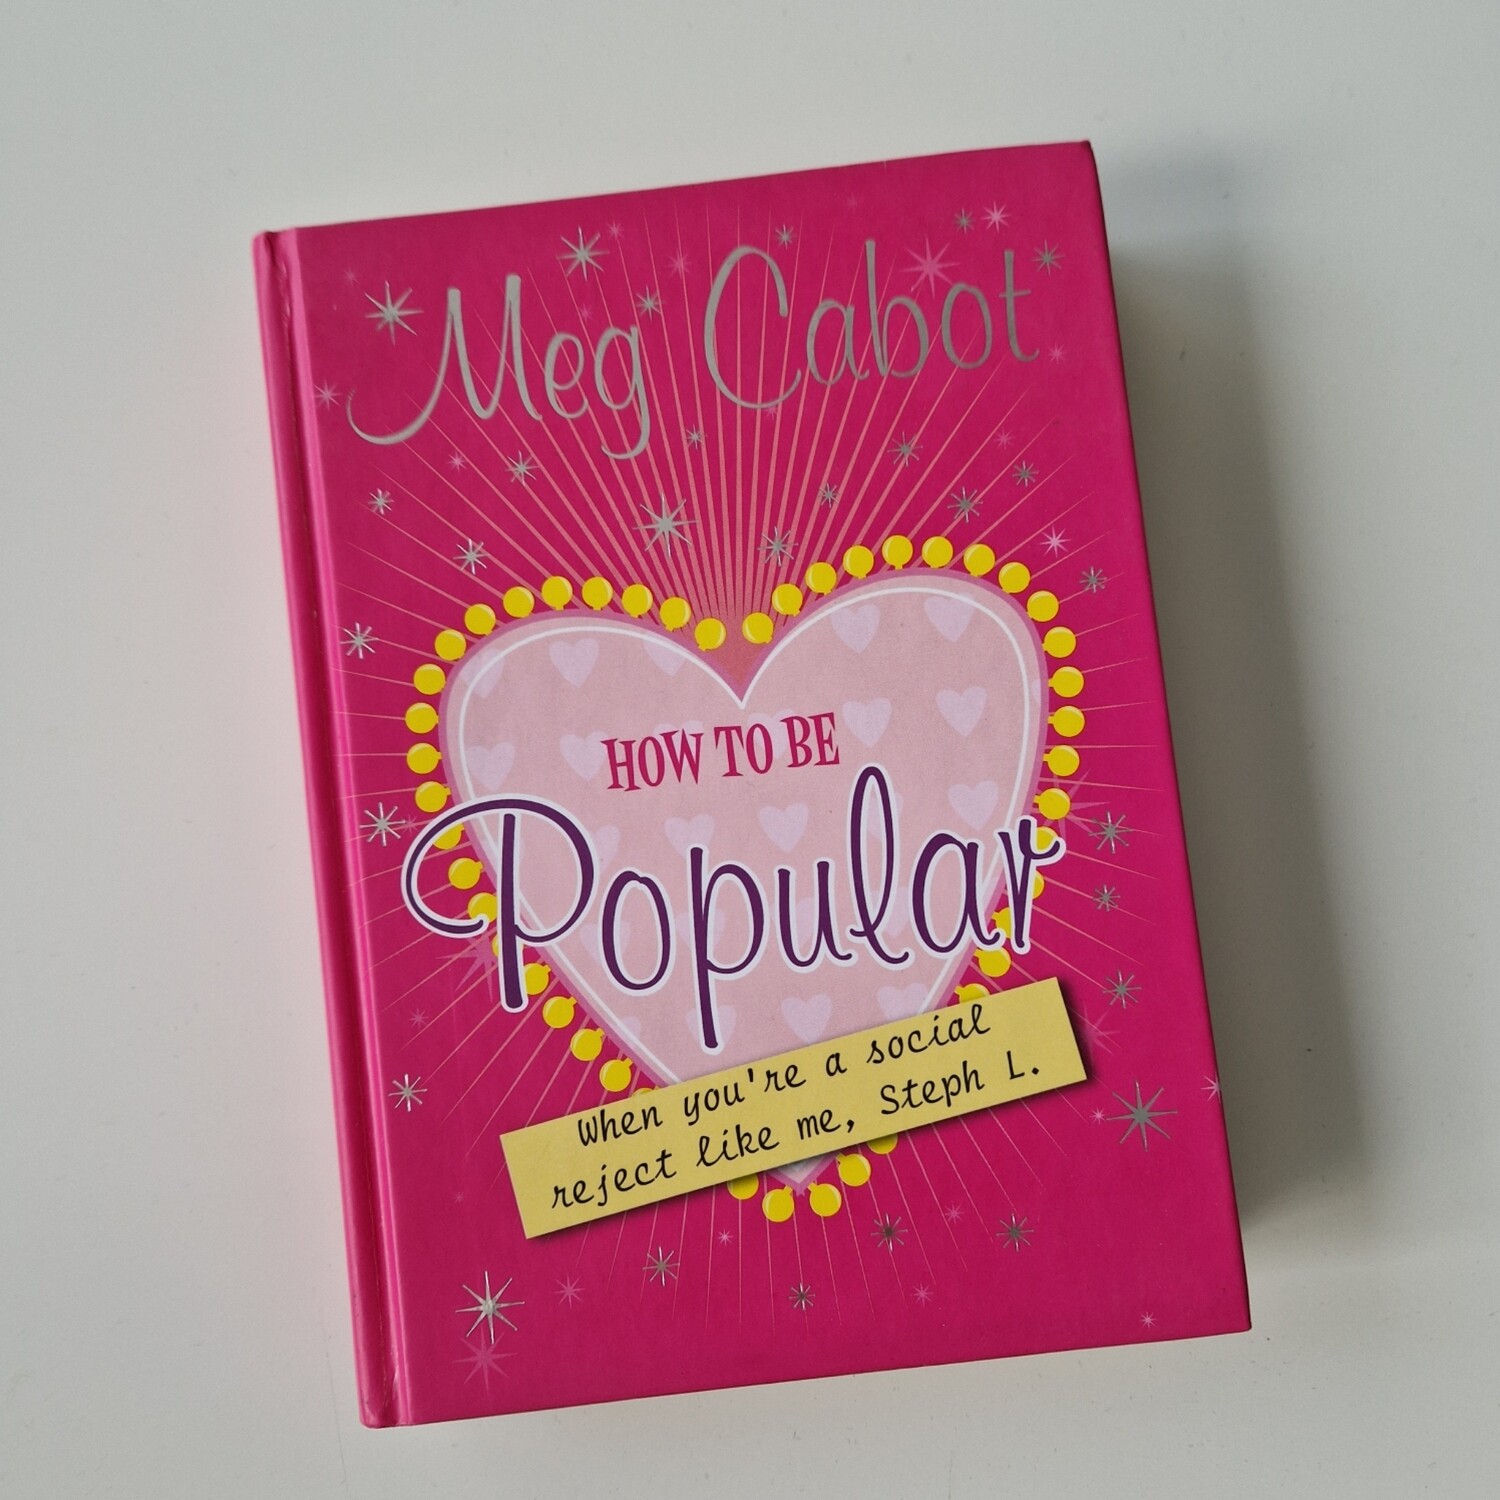 How to be Popular by Meg Caboot - Princess Diaries